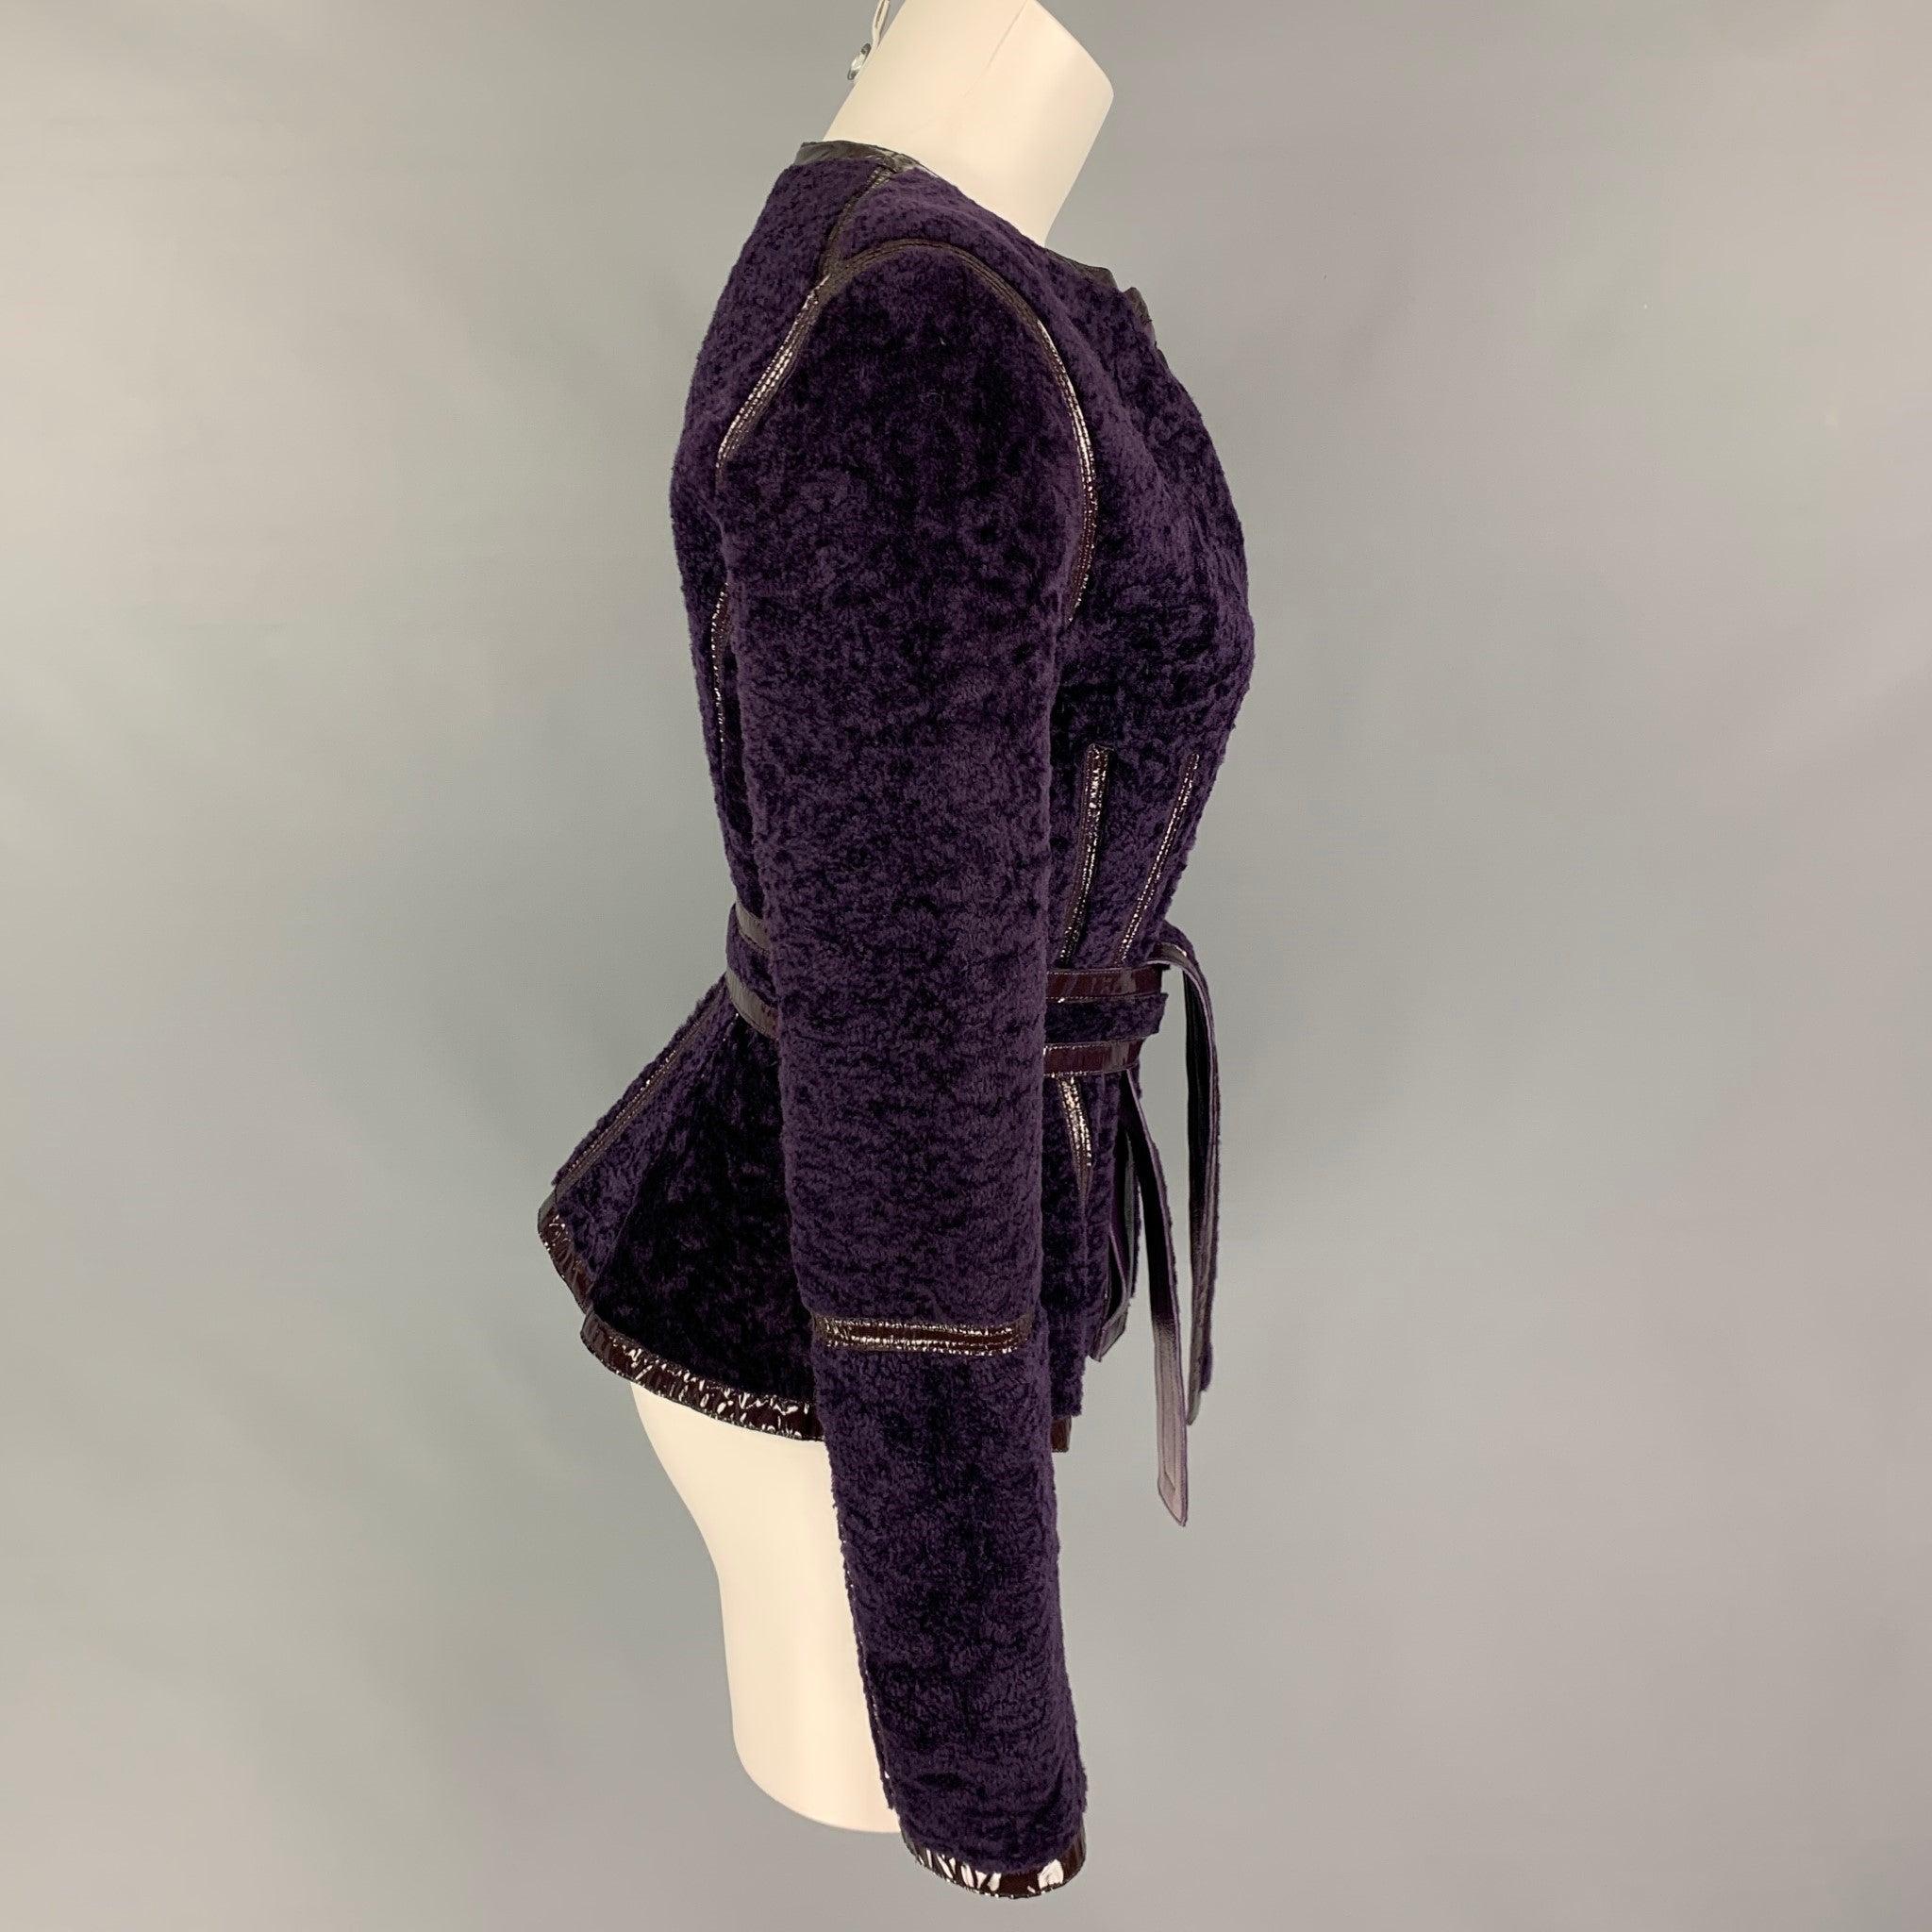 YVES SAINT LAURENT jacket comes in a purple shearling featuring a reversible leather design, patent leather trim, belted, and a buttoned closure.
New with tags.
 

Marked:   F 38  

Measurements: 
 
Shoulder: 15.5 inches  Bust: 34 inches  Sleeve: